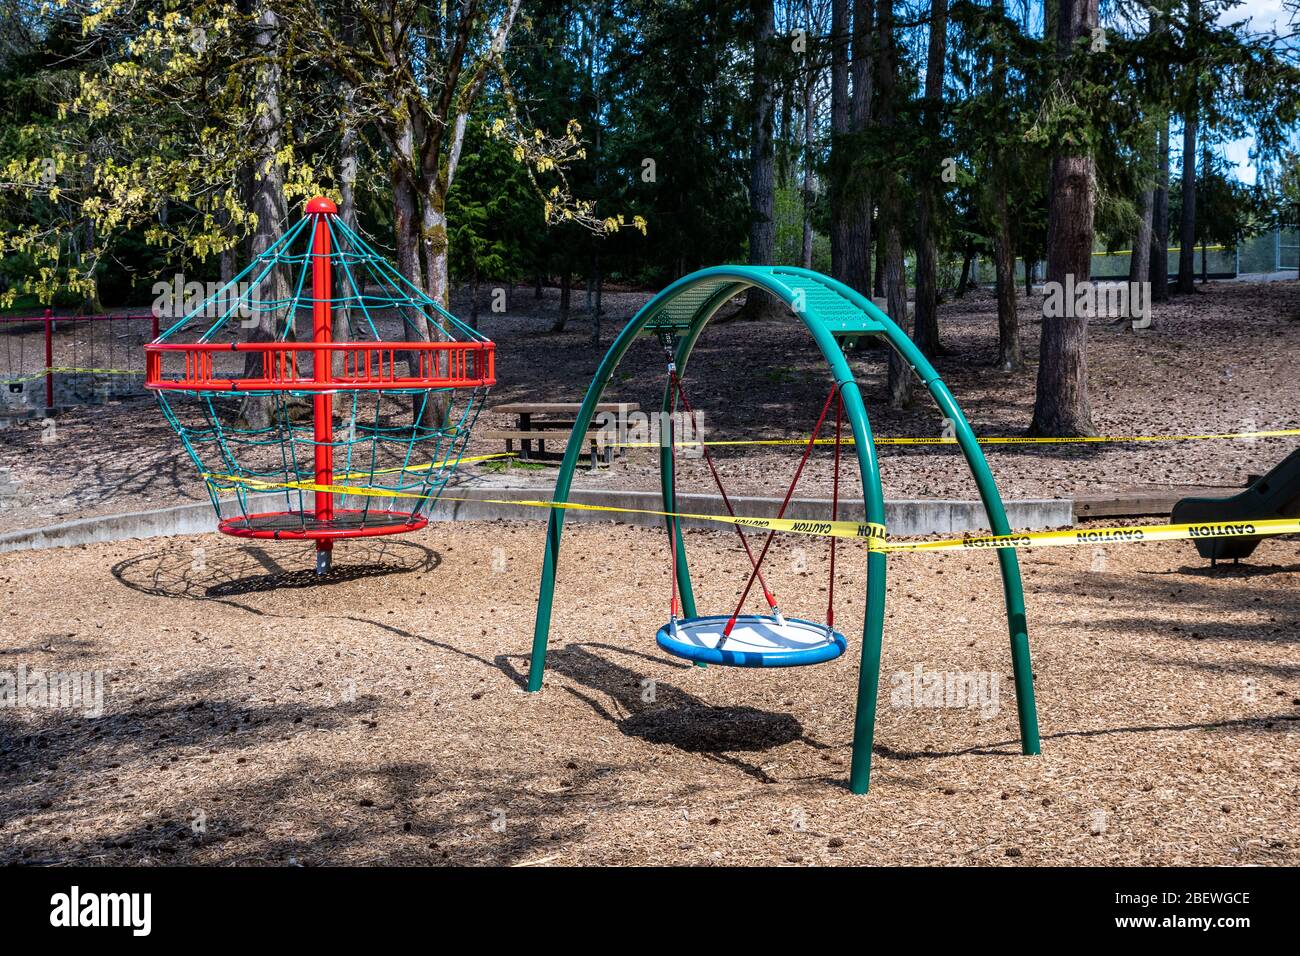 BELLEVUE, WA/USA – APRIL 15, 2020: Wilburton Hill Park, playground equipment closed with caution tape due to COVID 19 Stock Photo